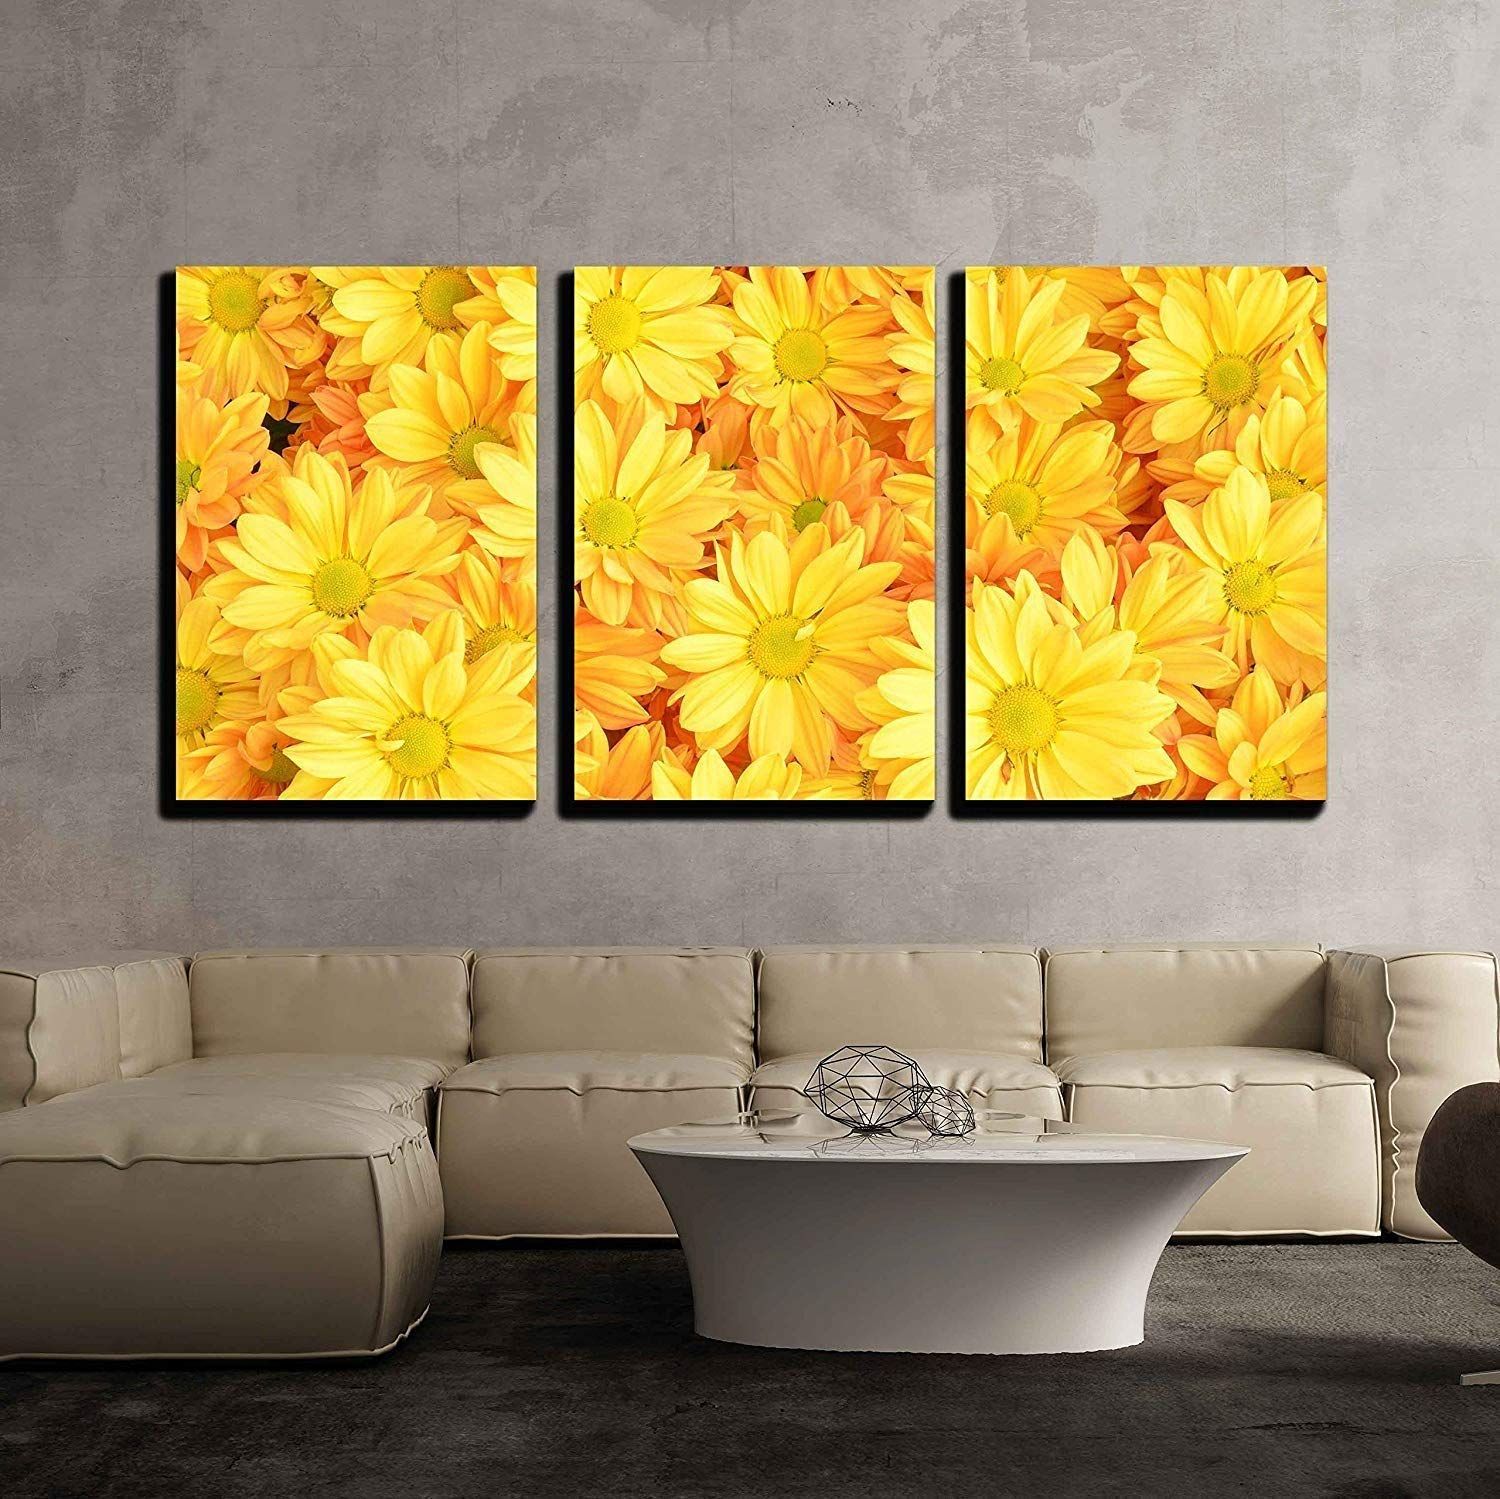 Wall26 – 3 Piece Canvas Wall Art – Yellow Chrysanthemum For Best And Newest Wall Framed Art Prints (View 5 of 20)